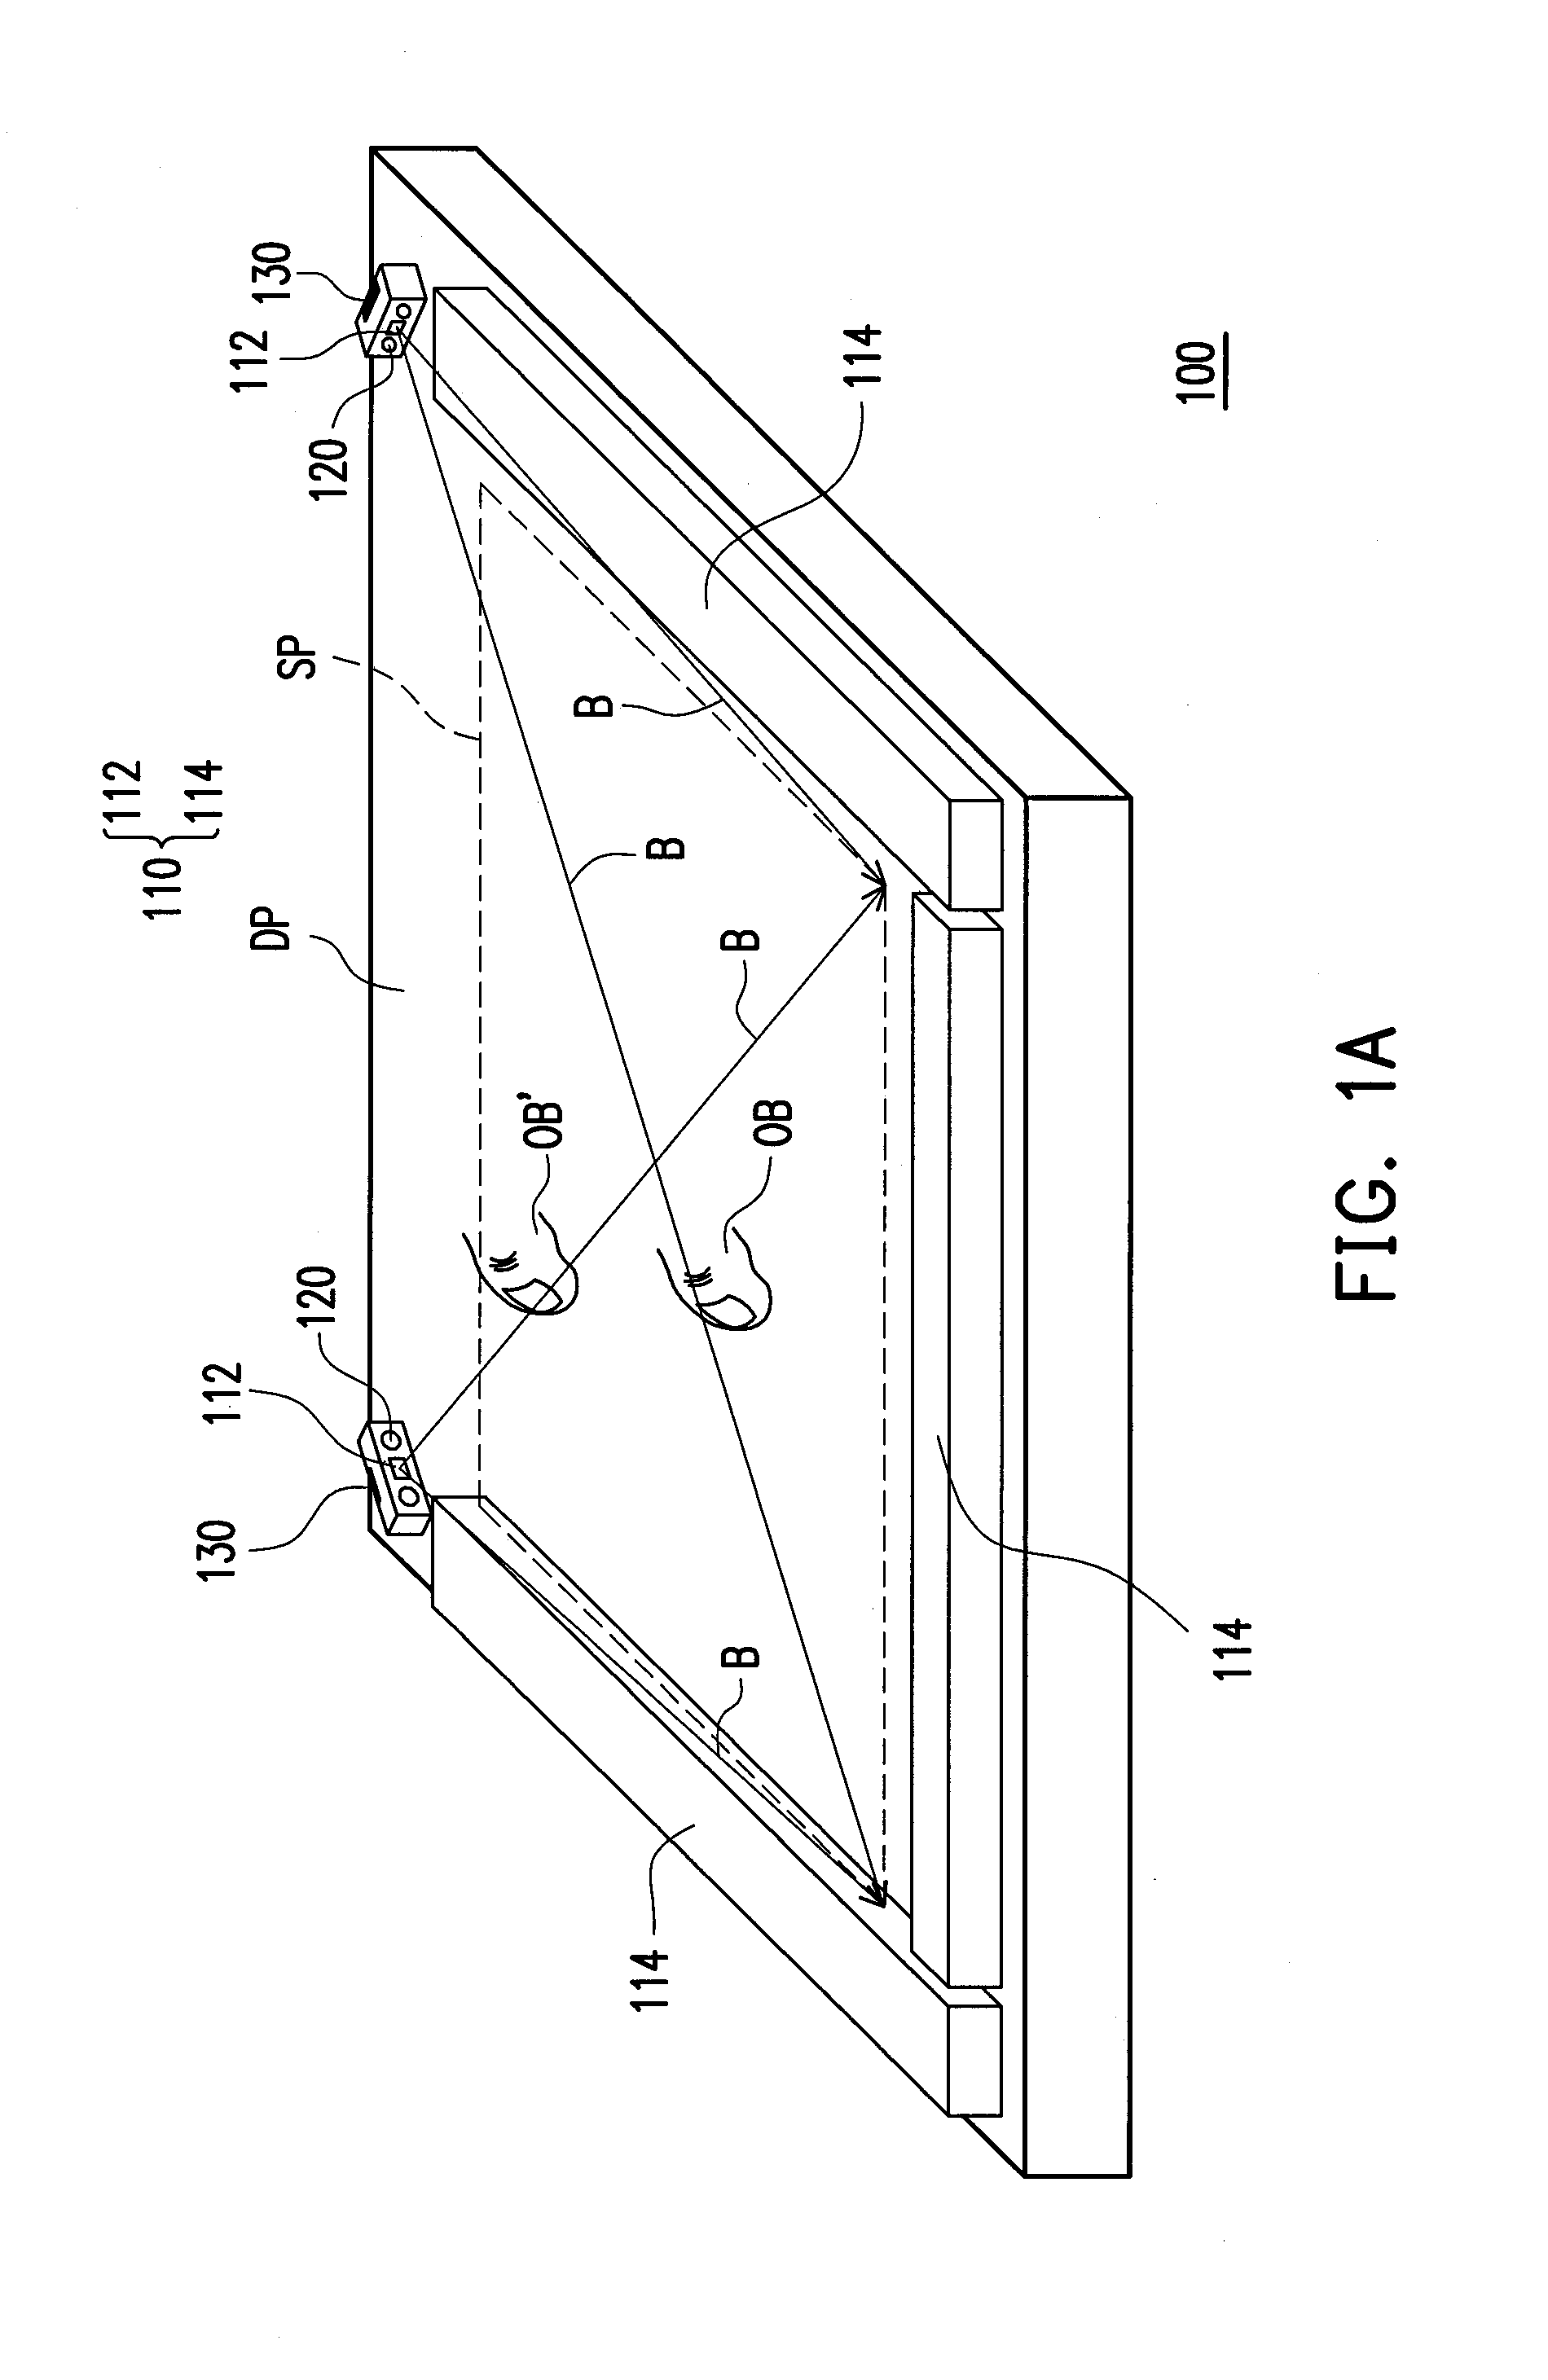 Optical touch system, method of touch detection and computer program product